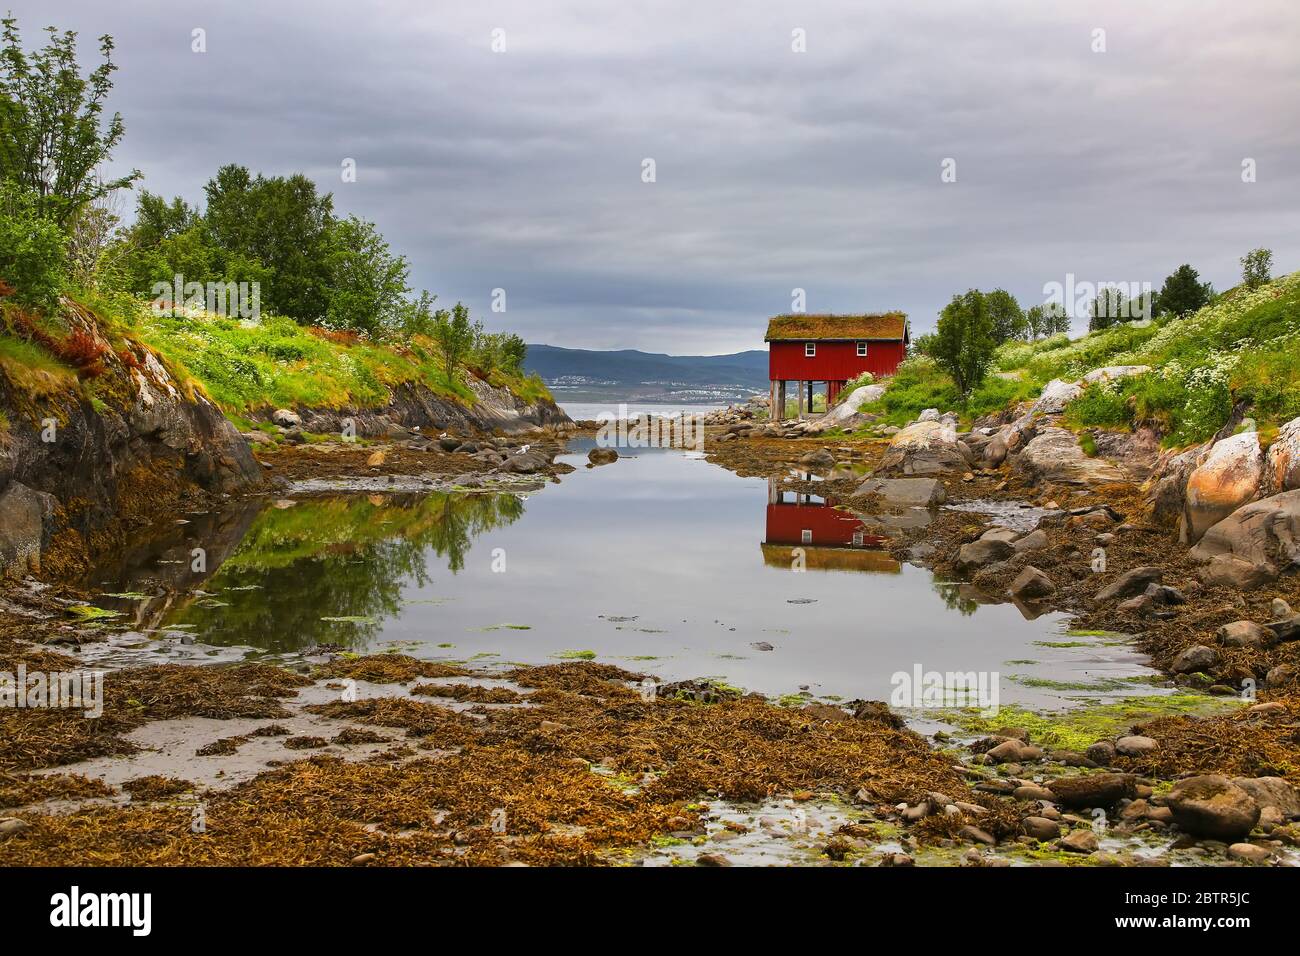 Beautiful landscape along waters edge, with a village & church & mountains in the background, Saltstraumen, Municipality of Bodo, Nordland, Norway. Stock Photo